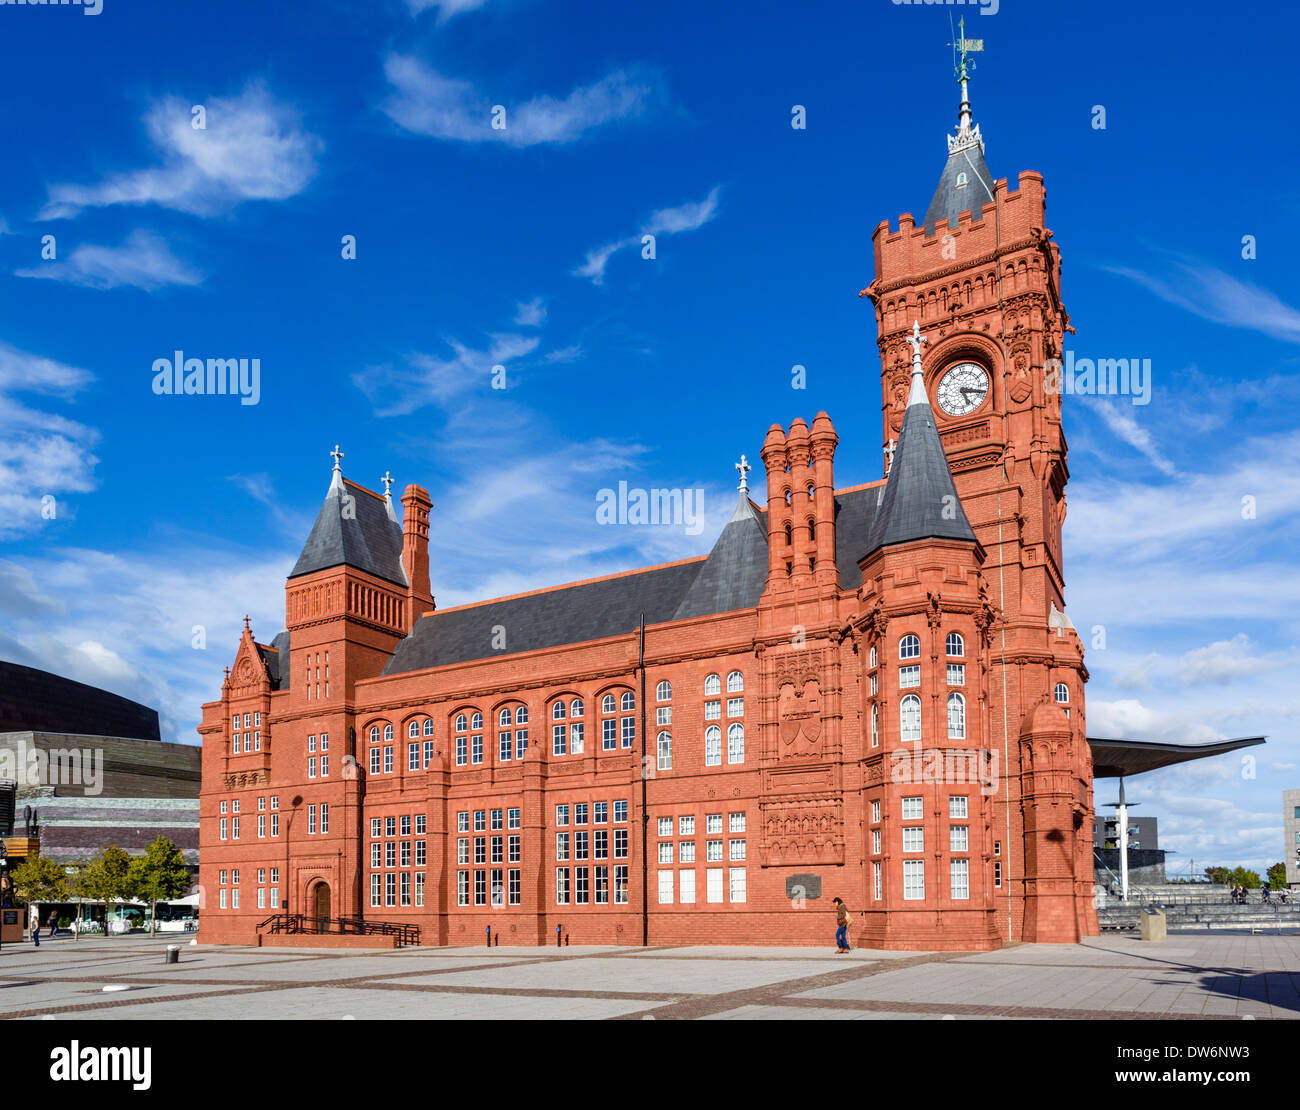 The historic Pierhead Building of the National Assembly for Wales, Cardiff Bay, Cardiff, South Glamorgan, Wales, UK Stock Photo